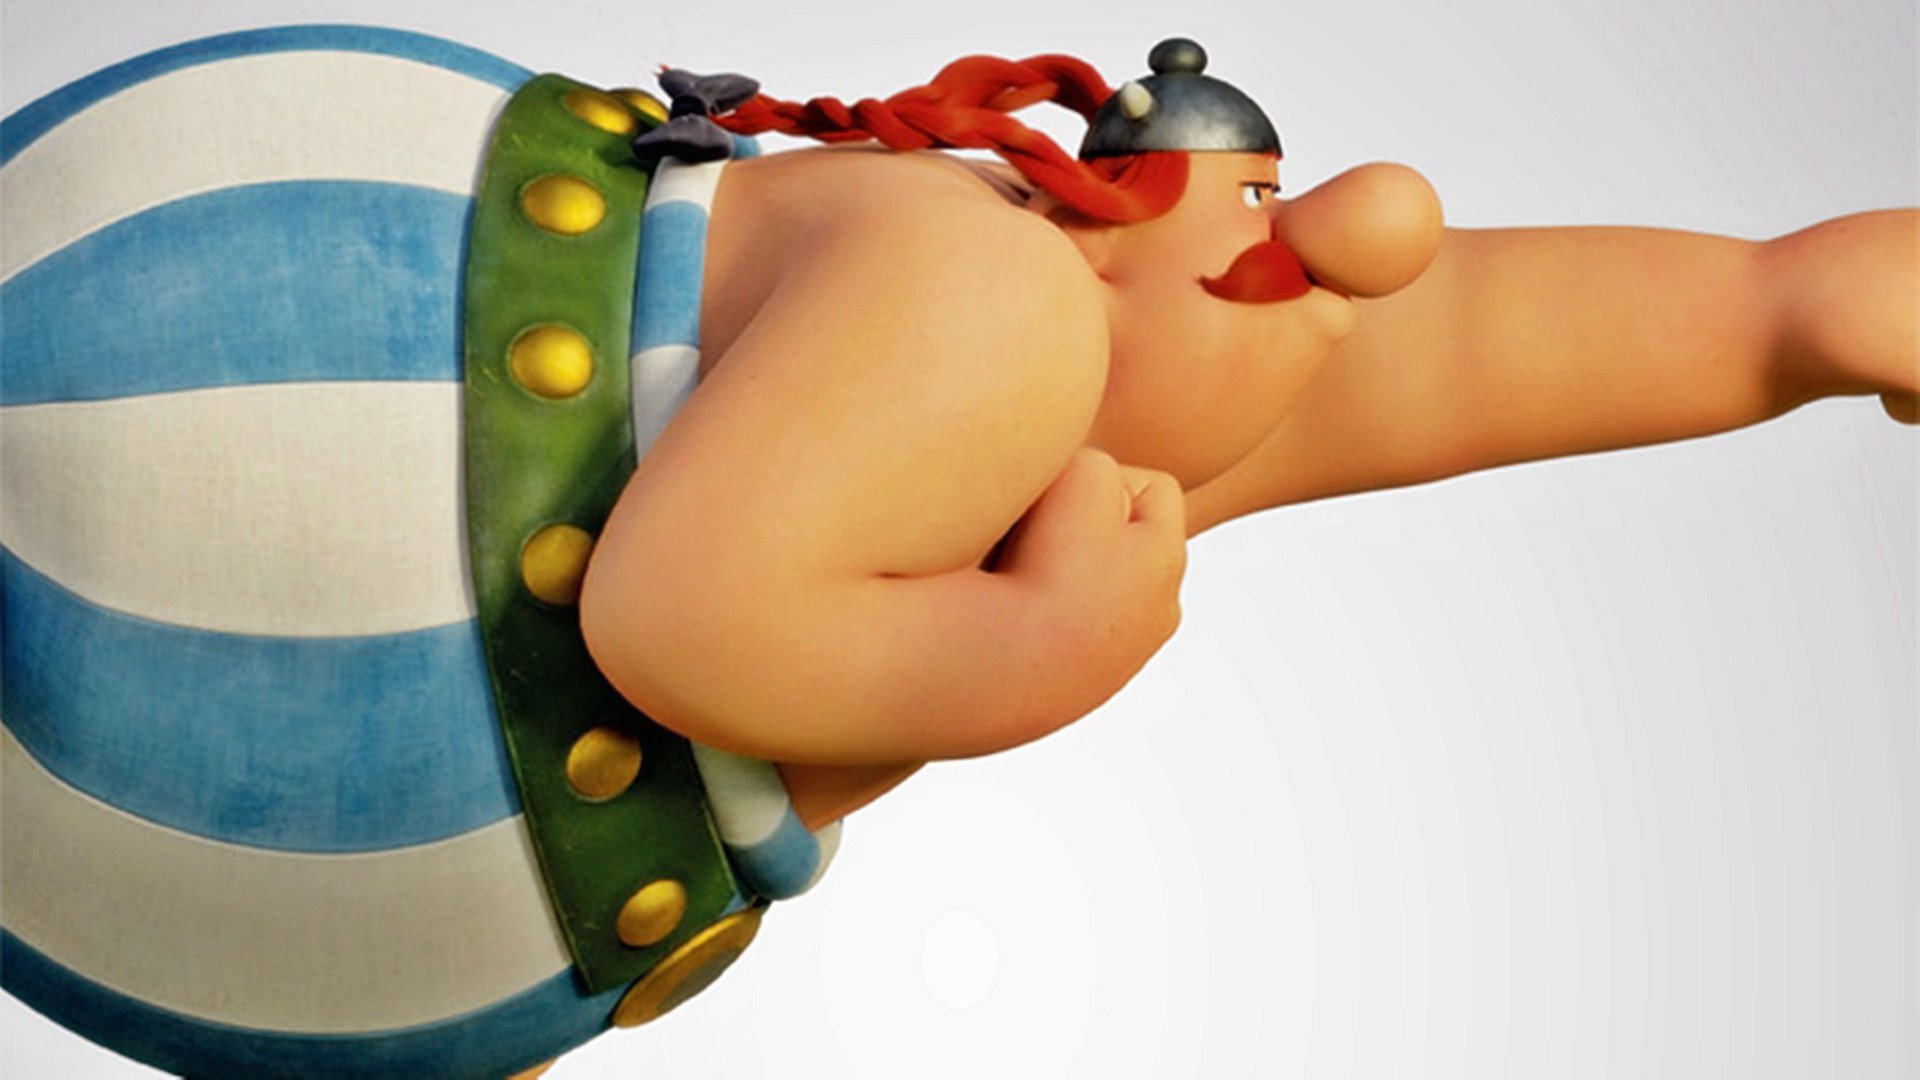 Movie Asterix: The Land of the Gods HD Wallpaper | Background Image